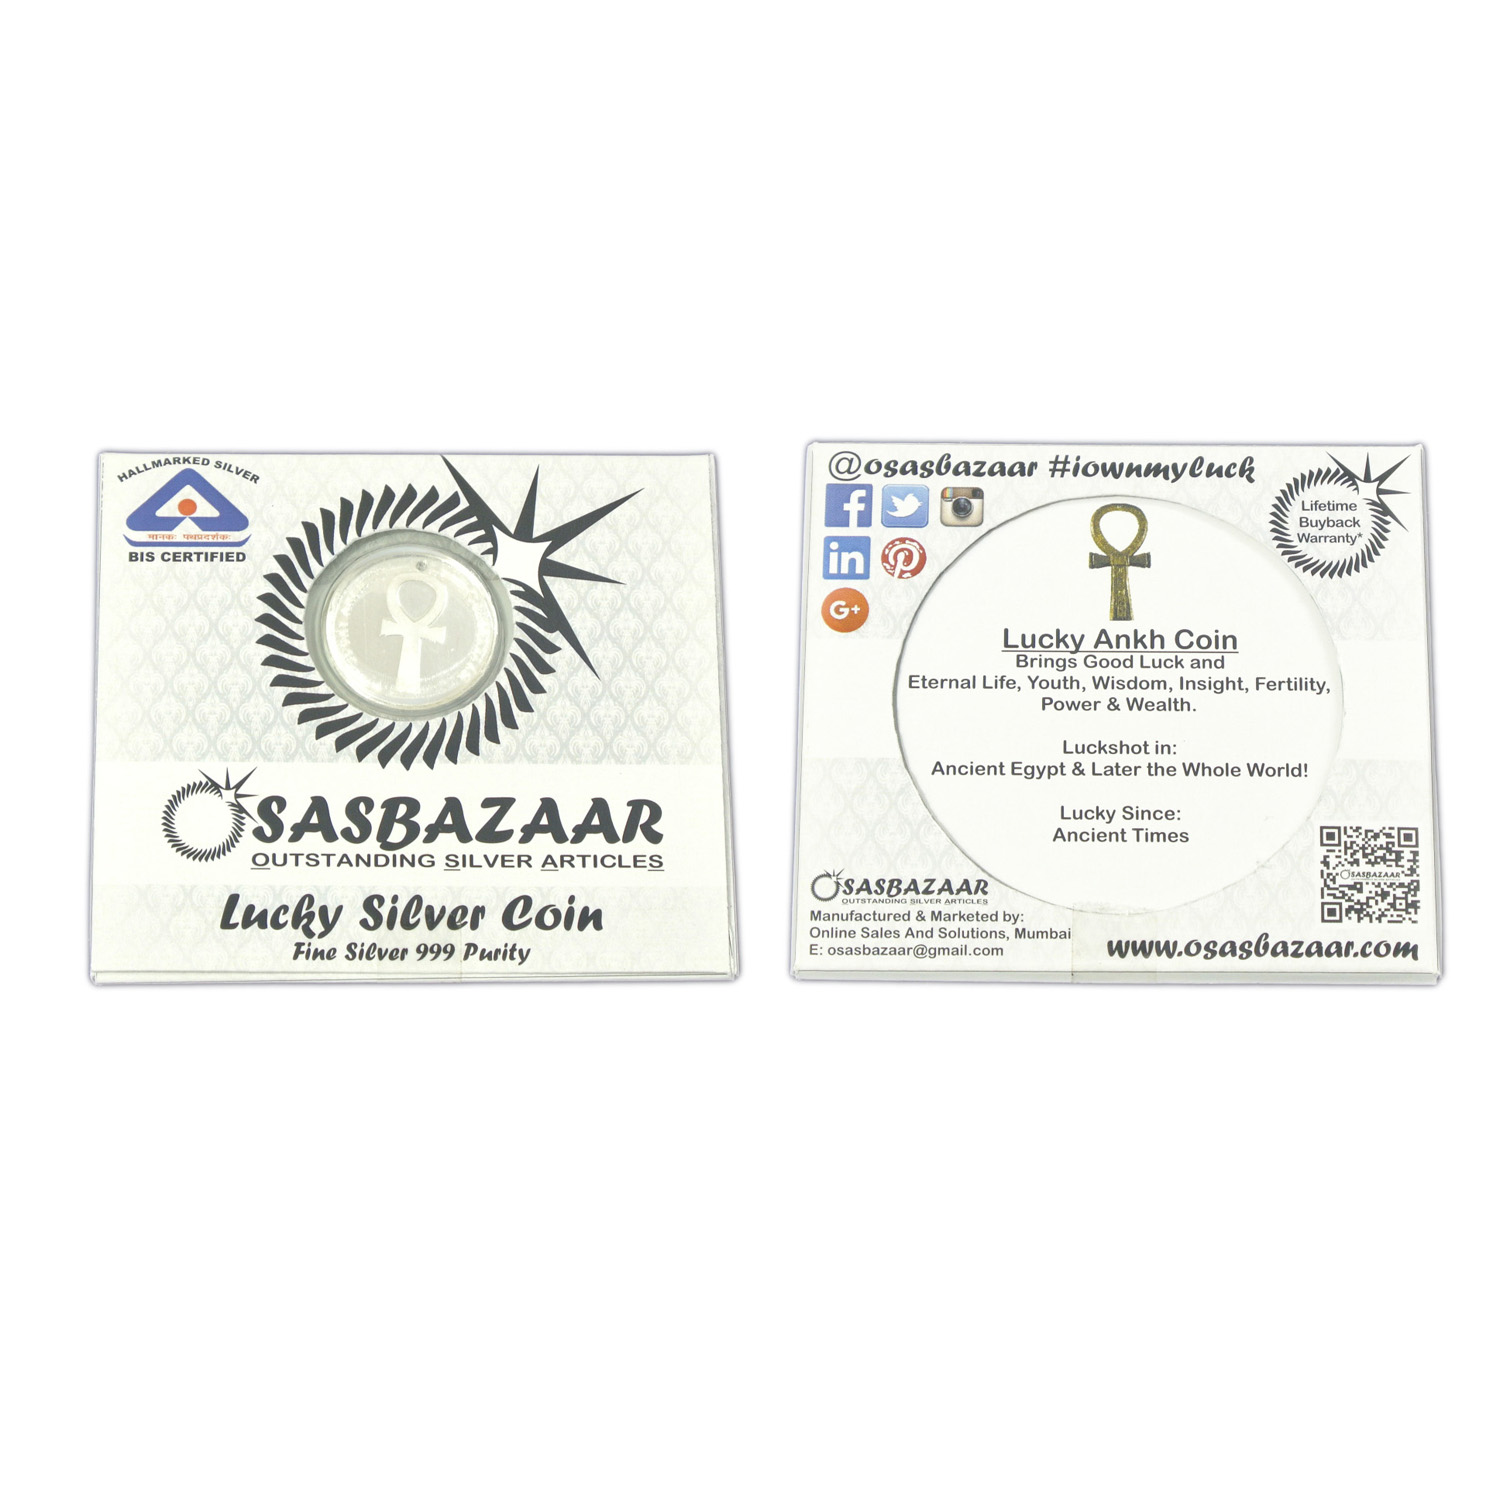 Silver Lucky Ankh Coin Packaging - Front and Back